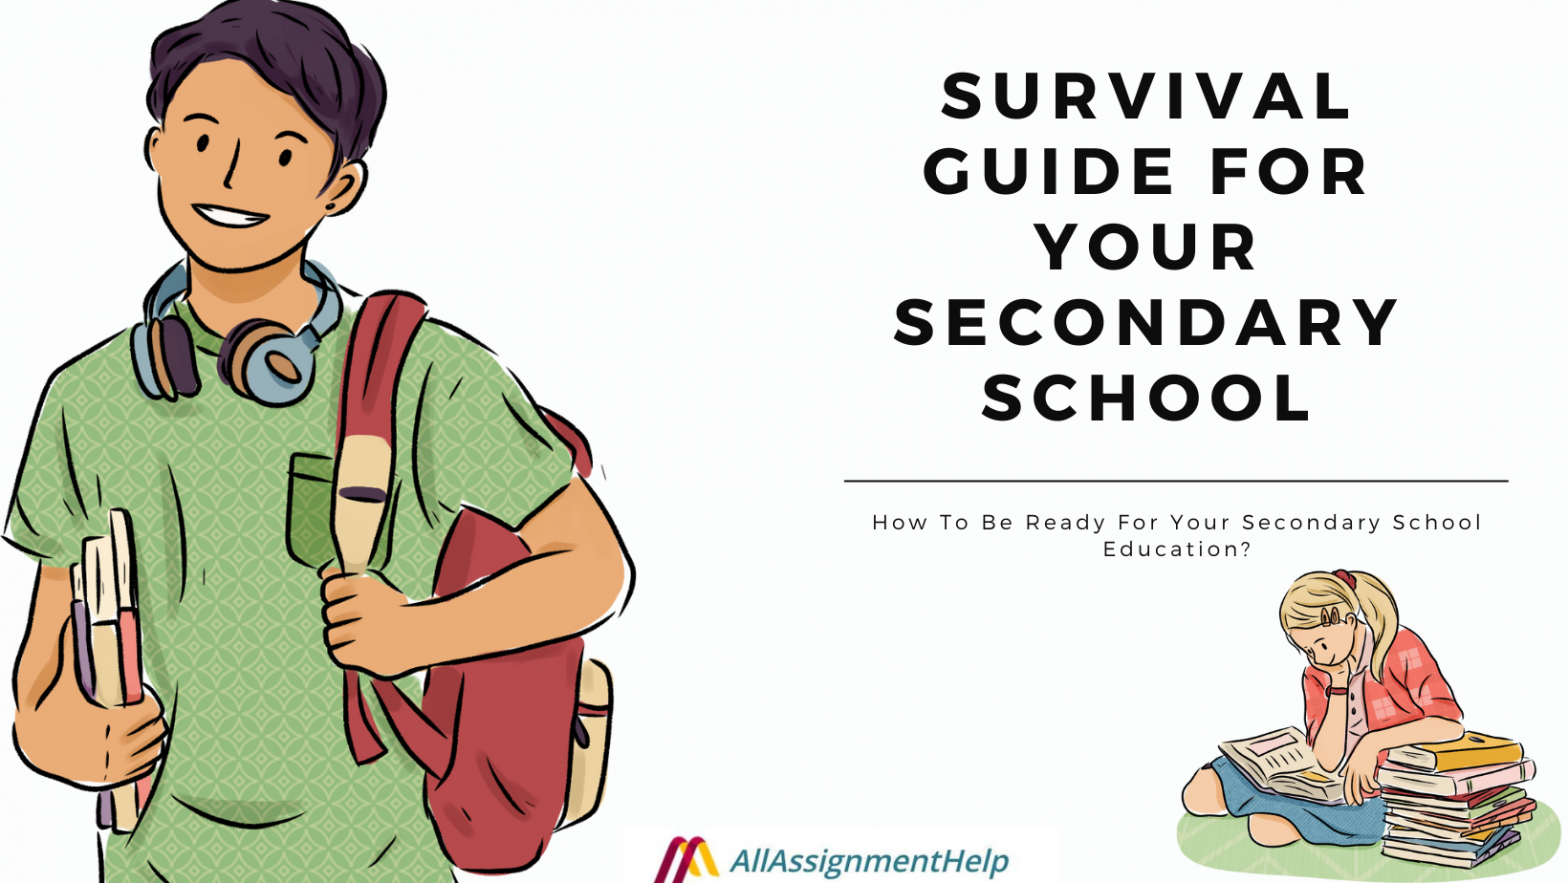 How To Be Ready For Your Secondary School Education